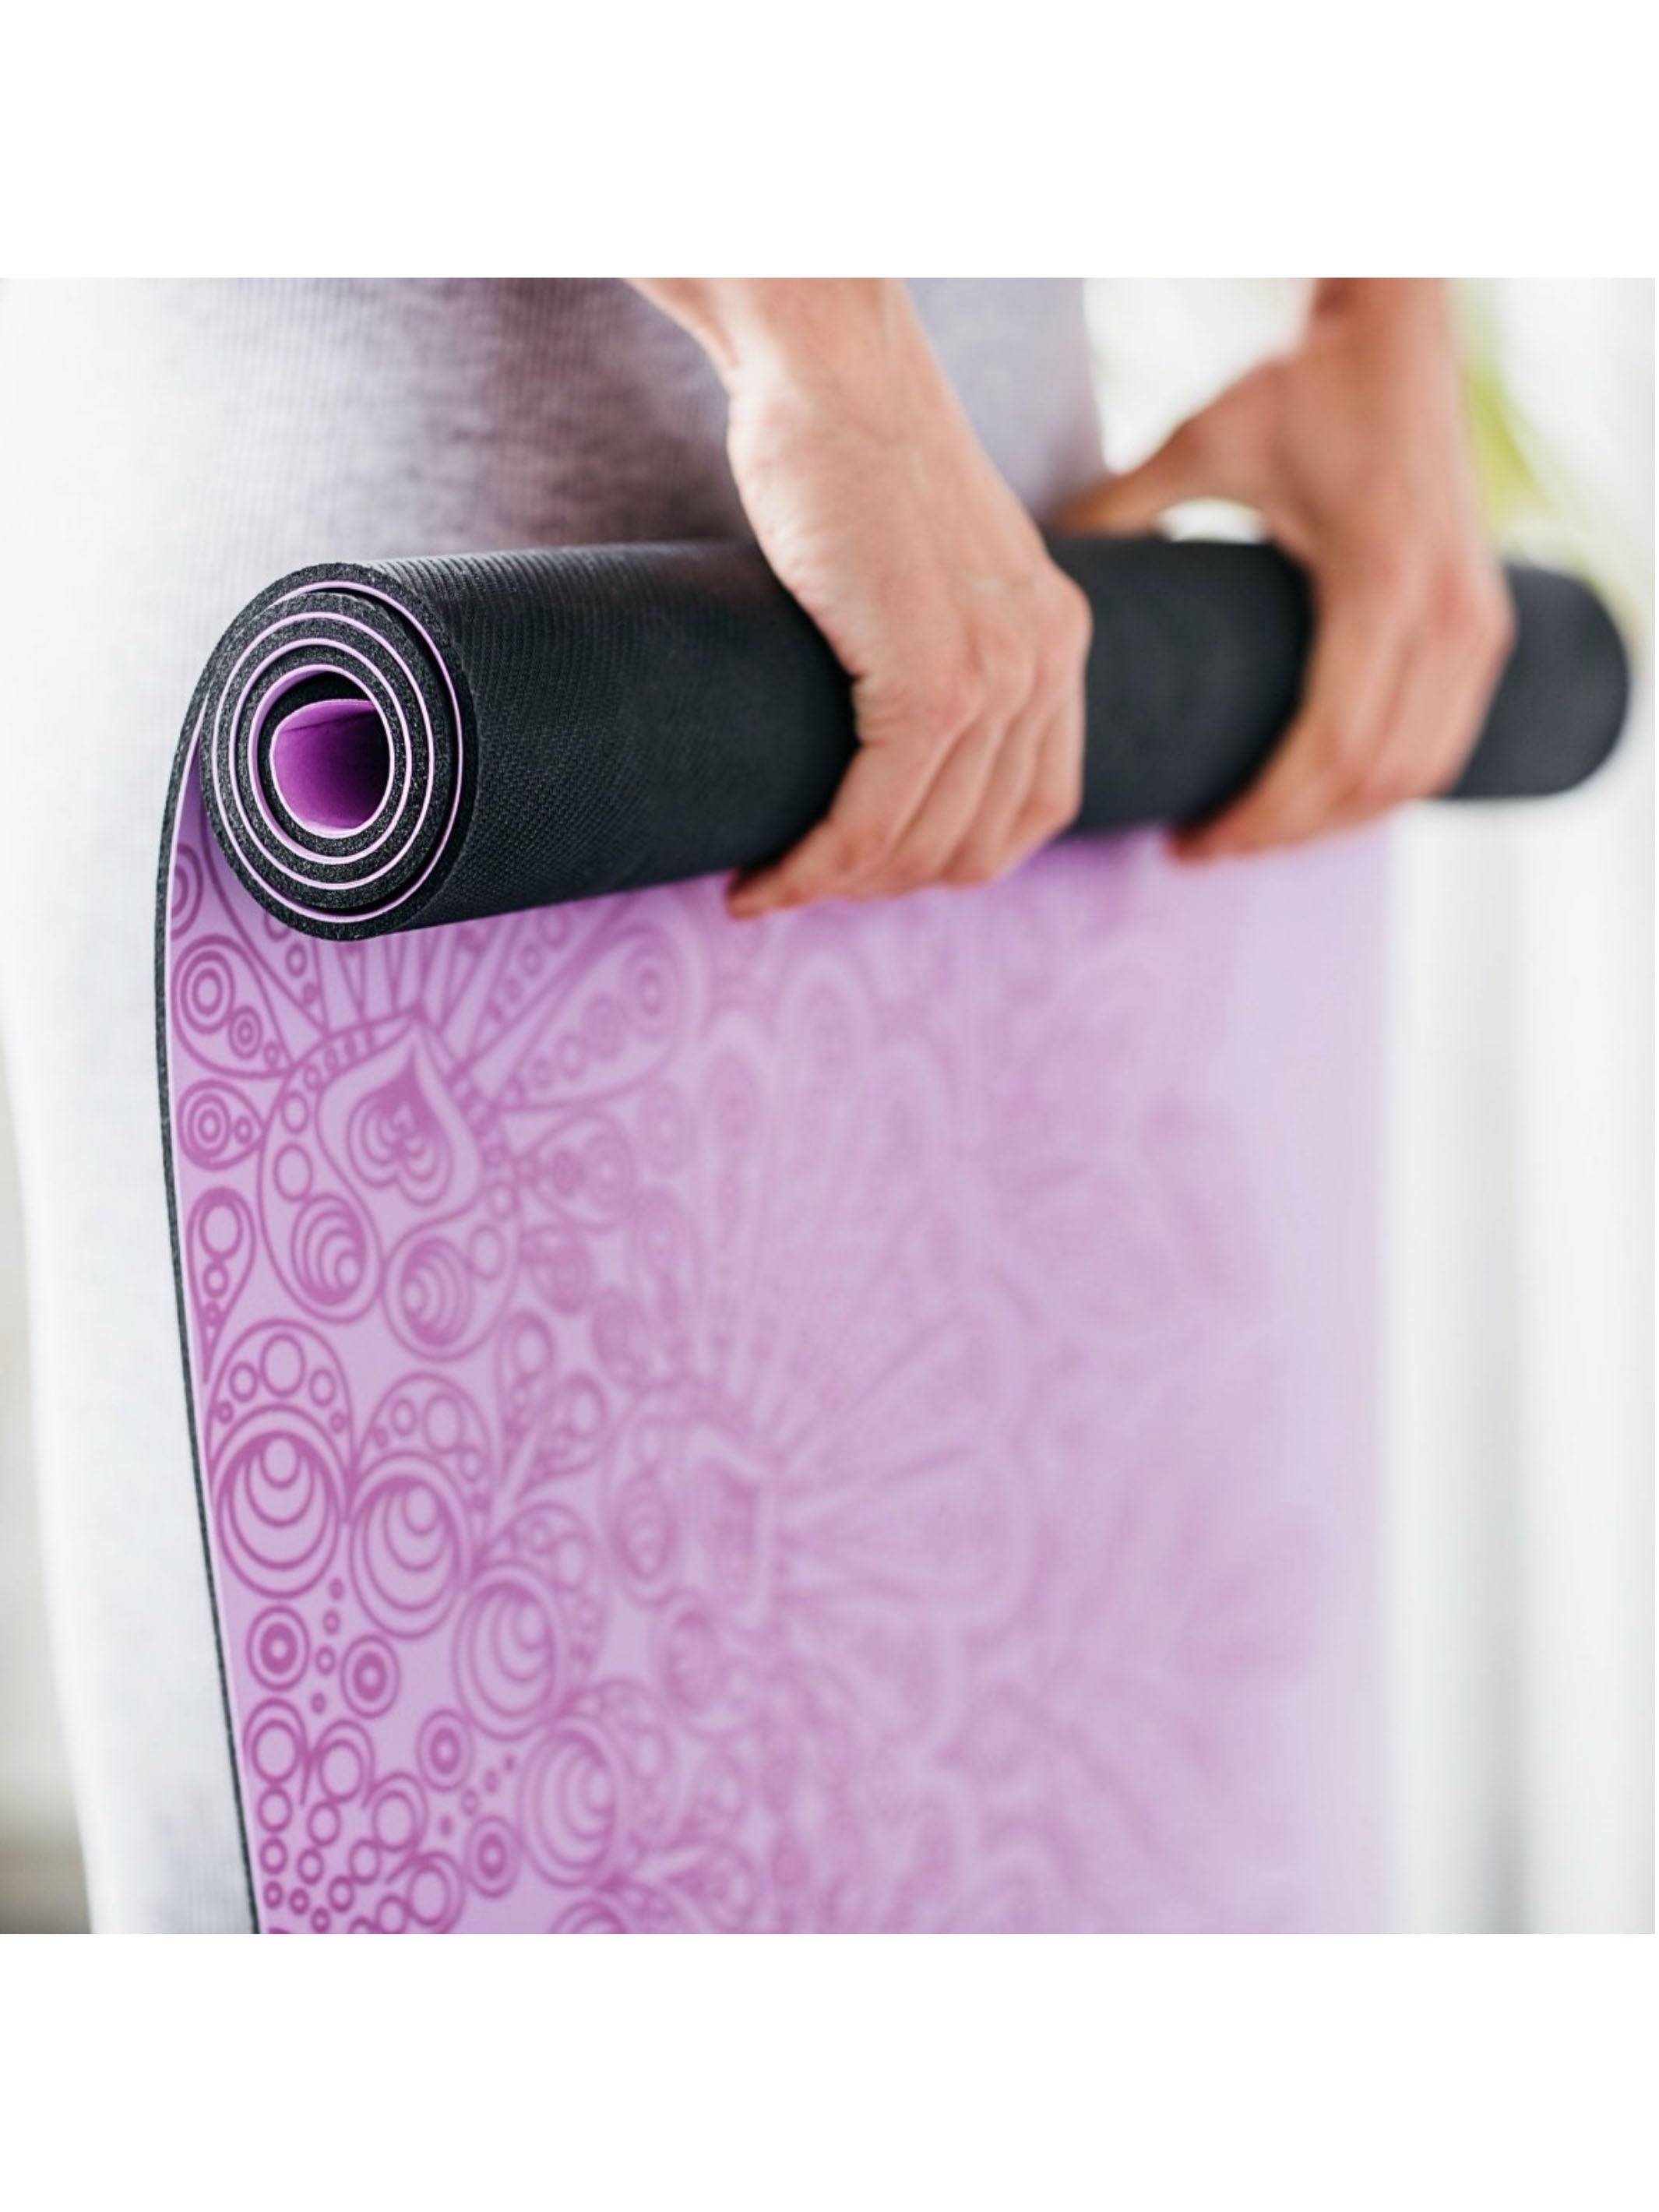 YOGGYS SMALL YOGA MAT [MANDALA PURPLE] - YOGA STORE - Everything for your  yoga practice. With style and high quality.